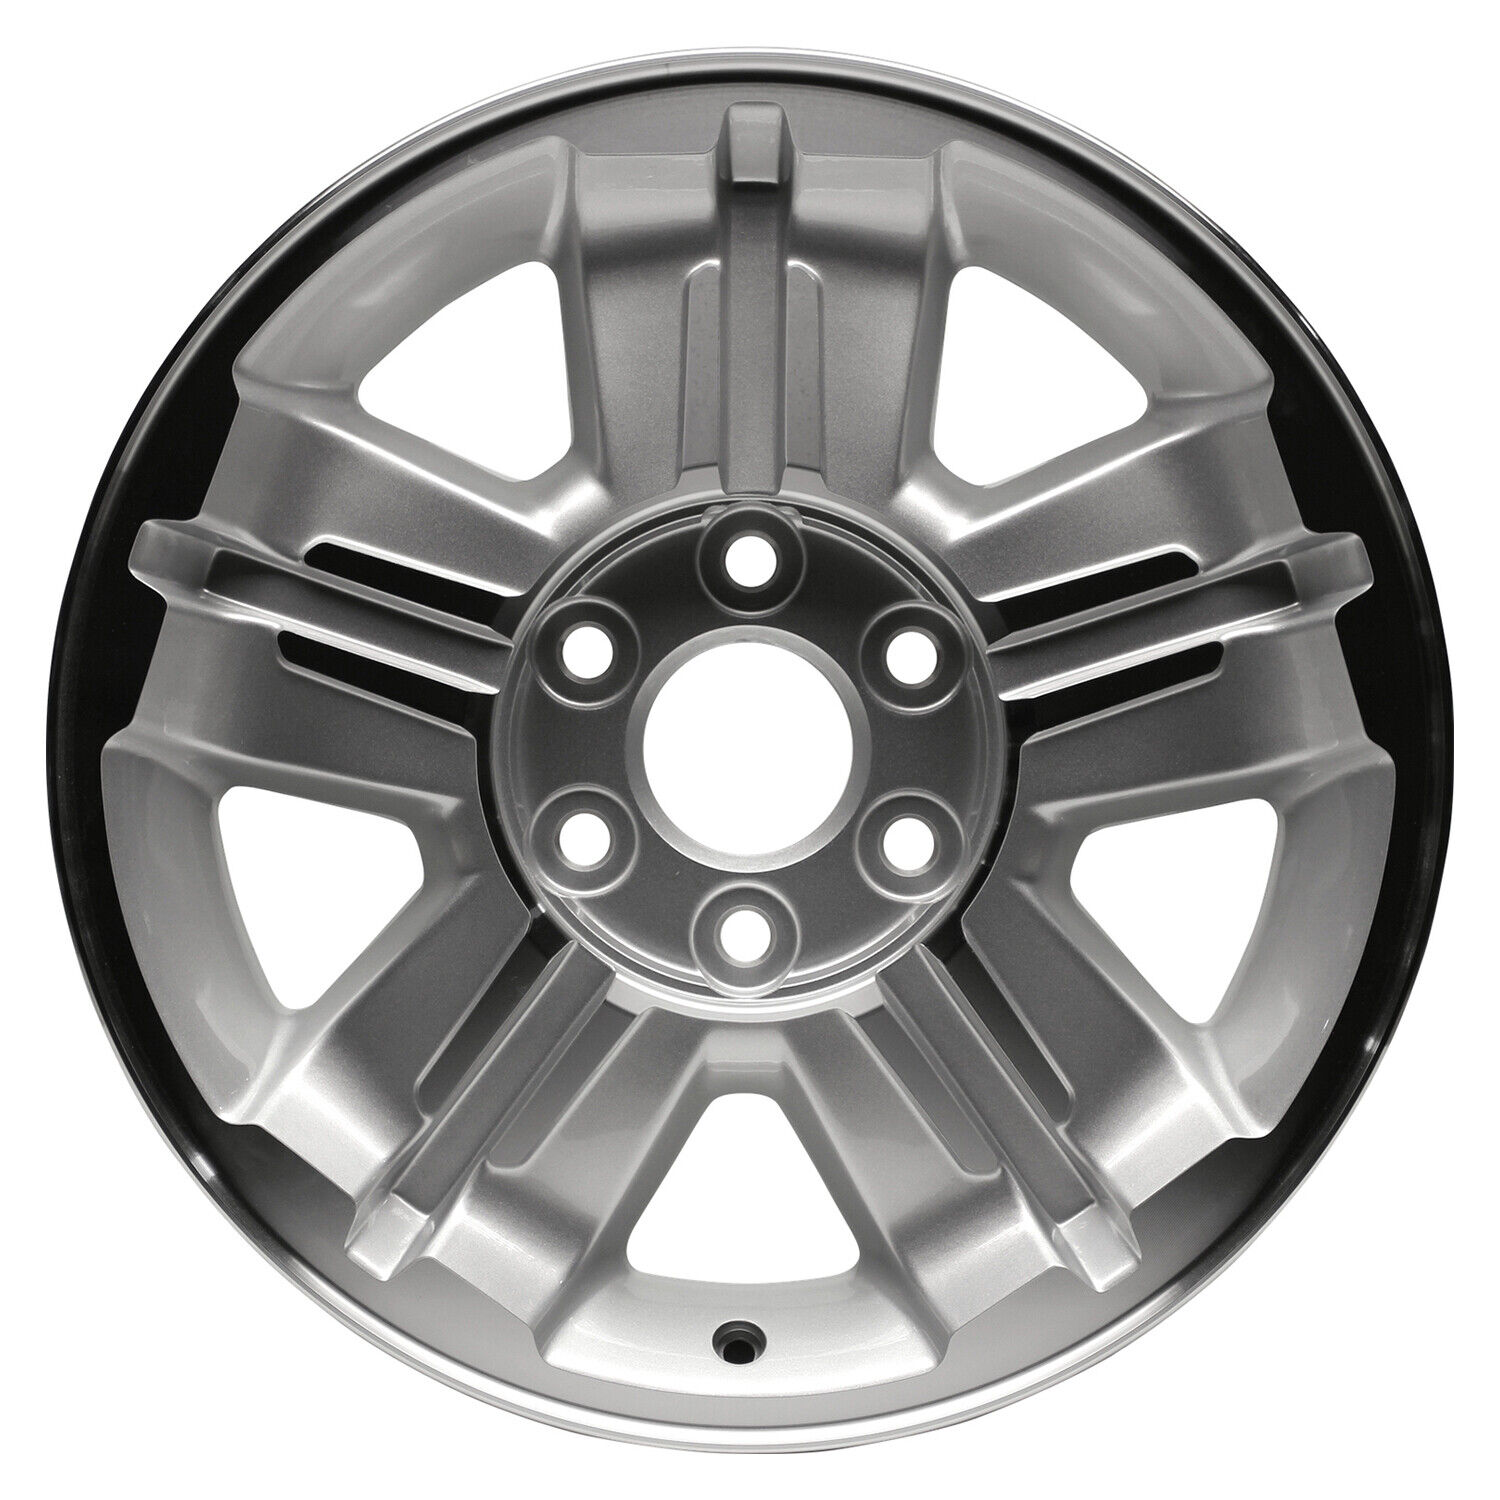 05300 Reconditioned OEM Aluminum Wheel 18x8 fits 2007-2013 Chevrolet Avalanche